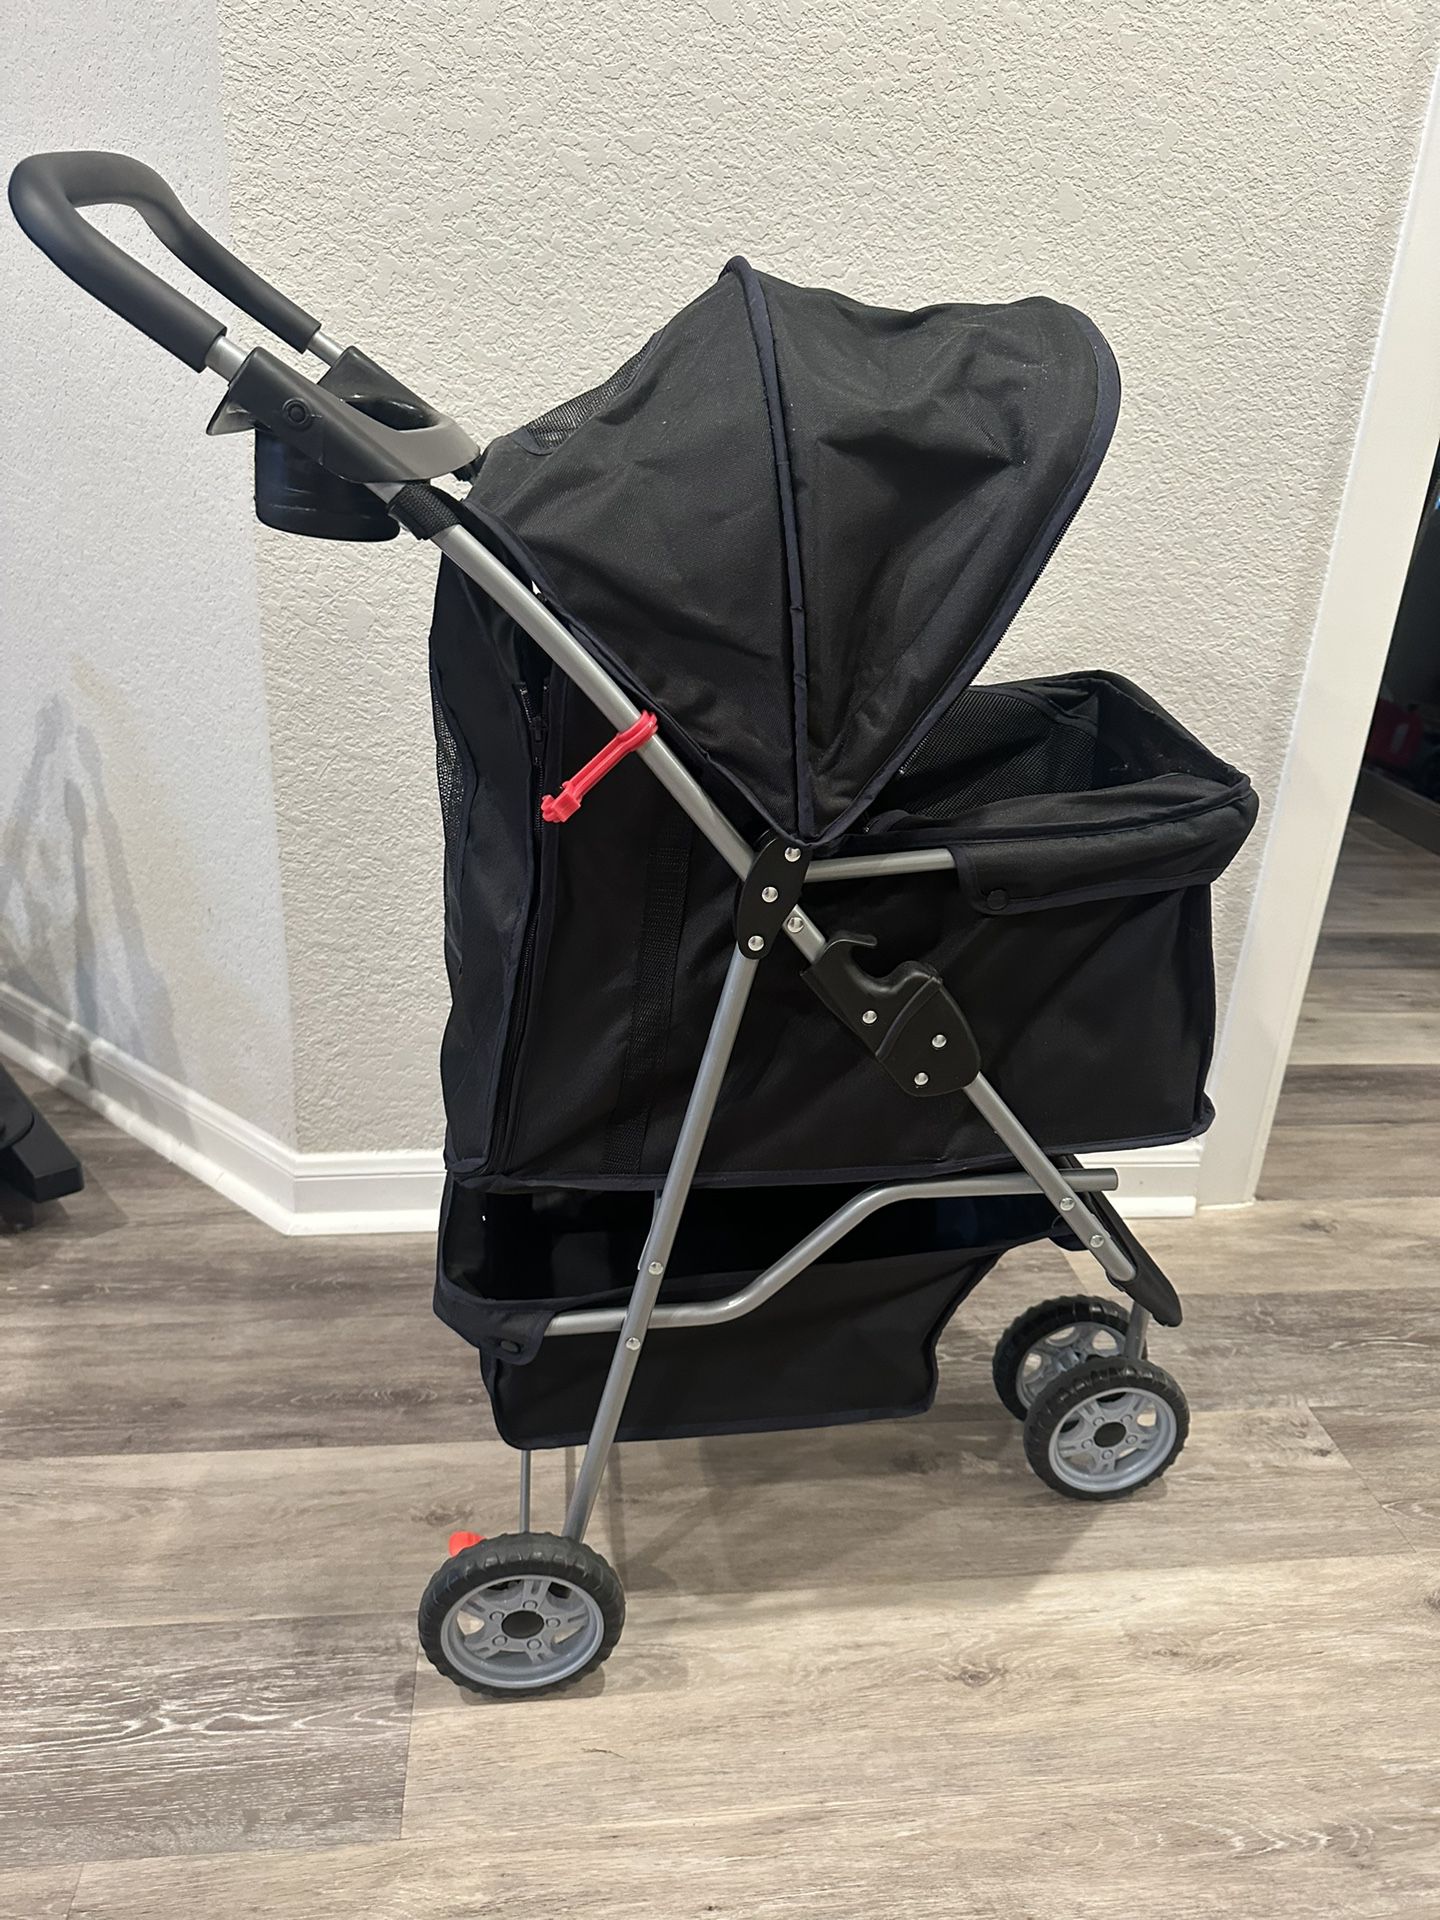 Pet Stroller For Puppies, Kittens, and Small Dogs